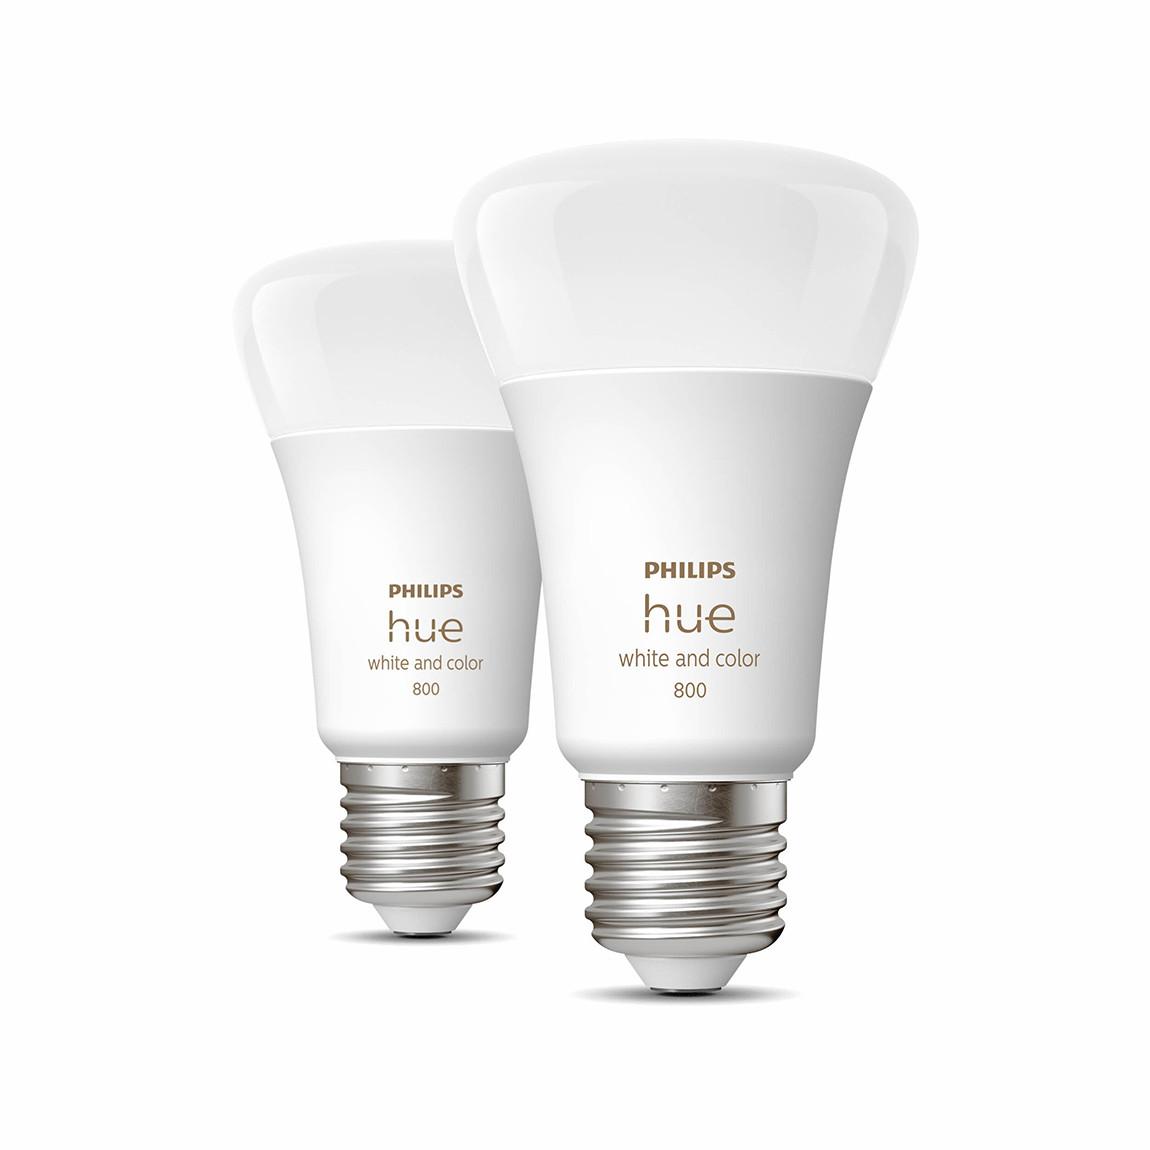 Philips Hue White and Color Ambiance E27 Bluetooth 2er-Set - LED-Lampe aus